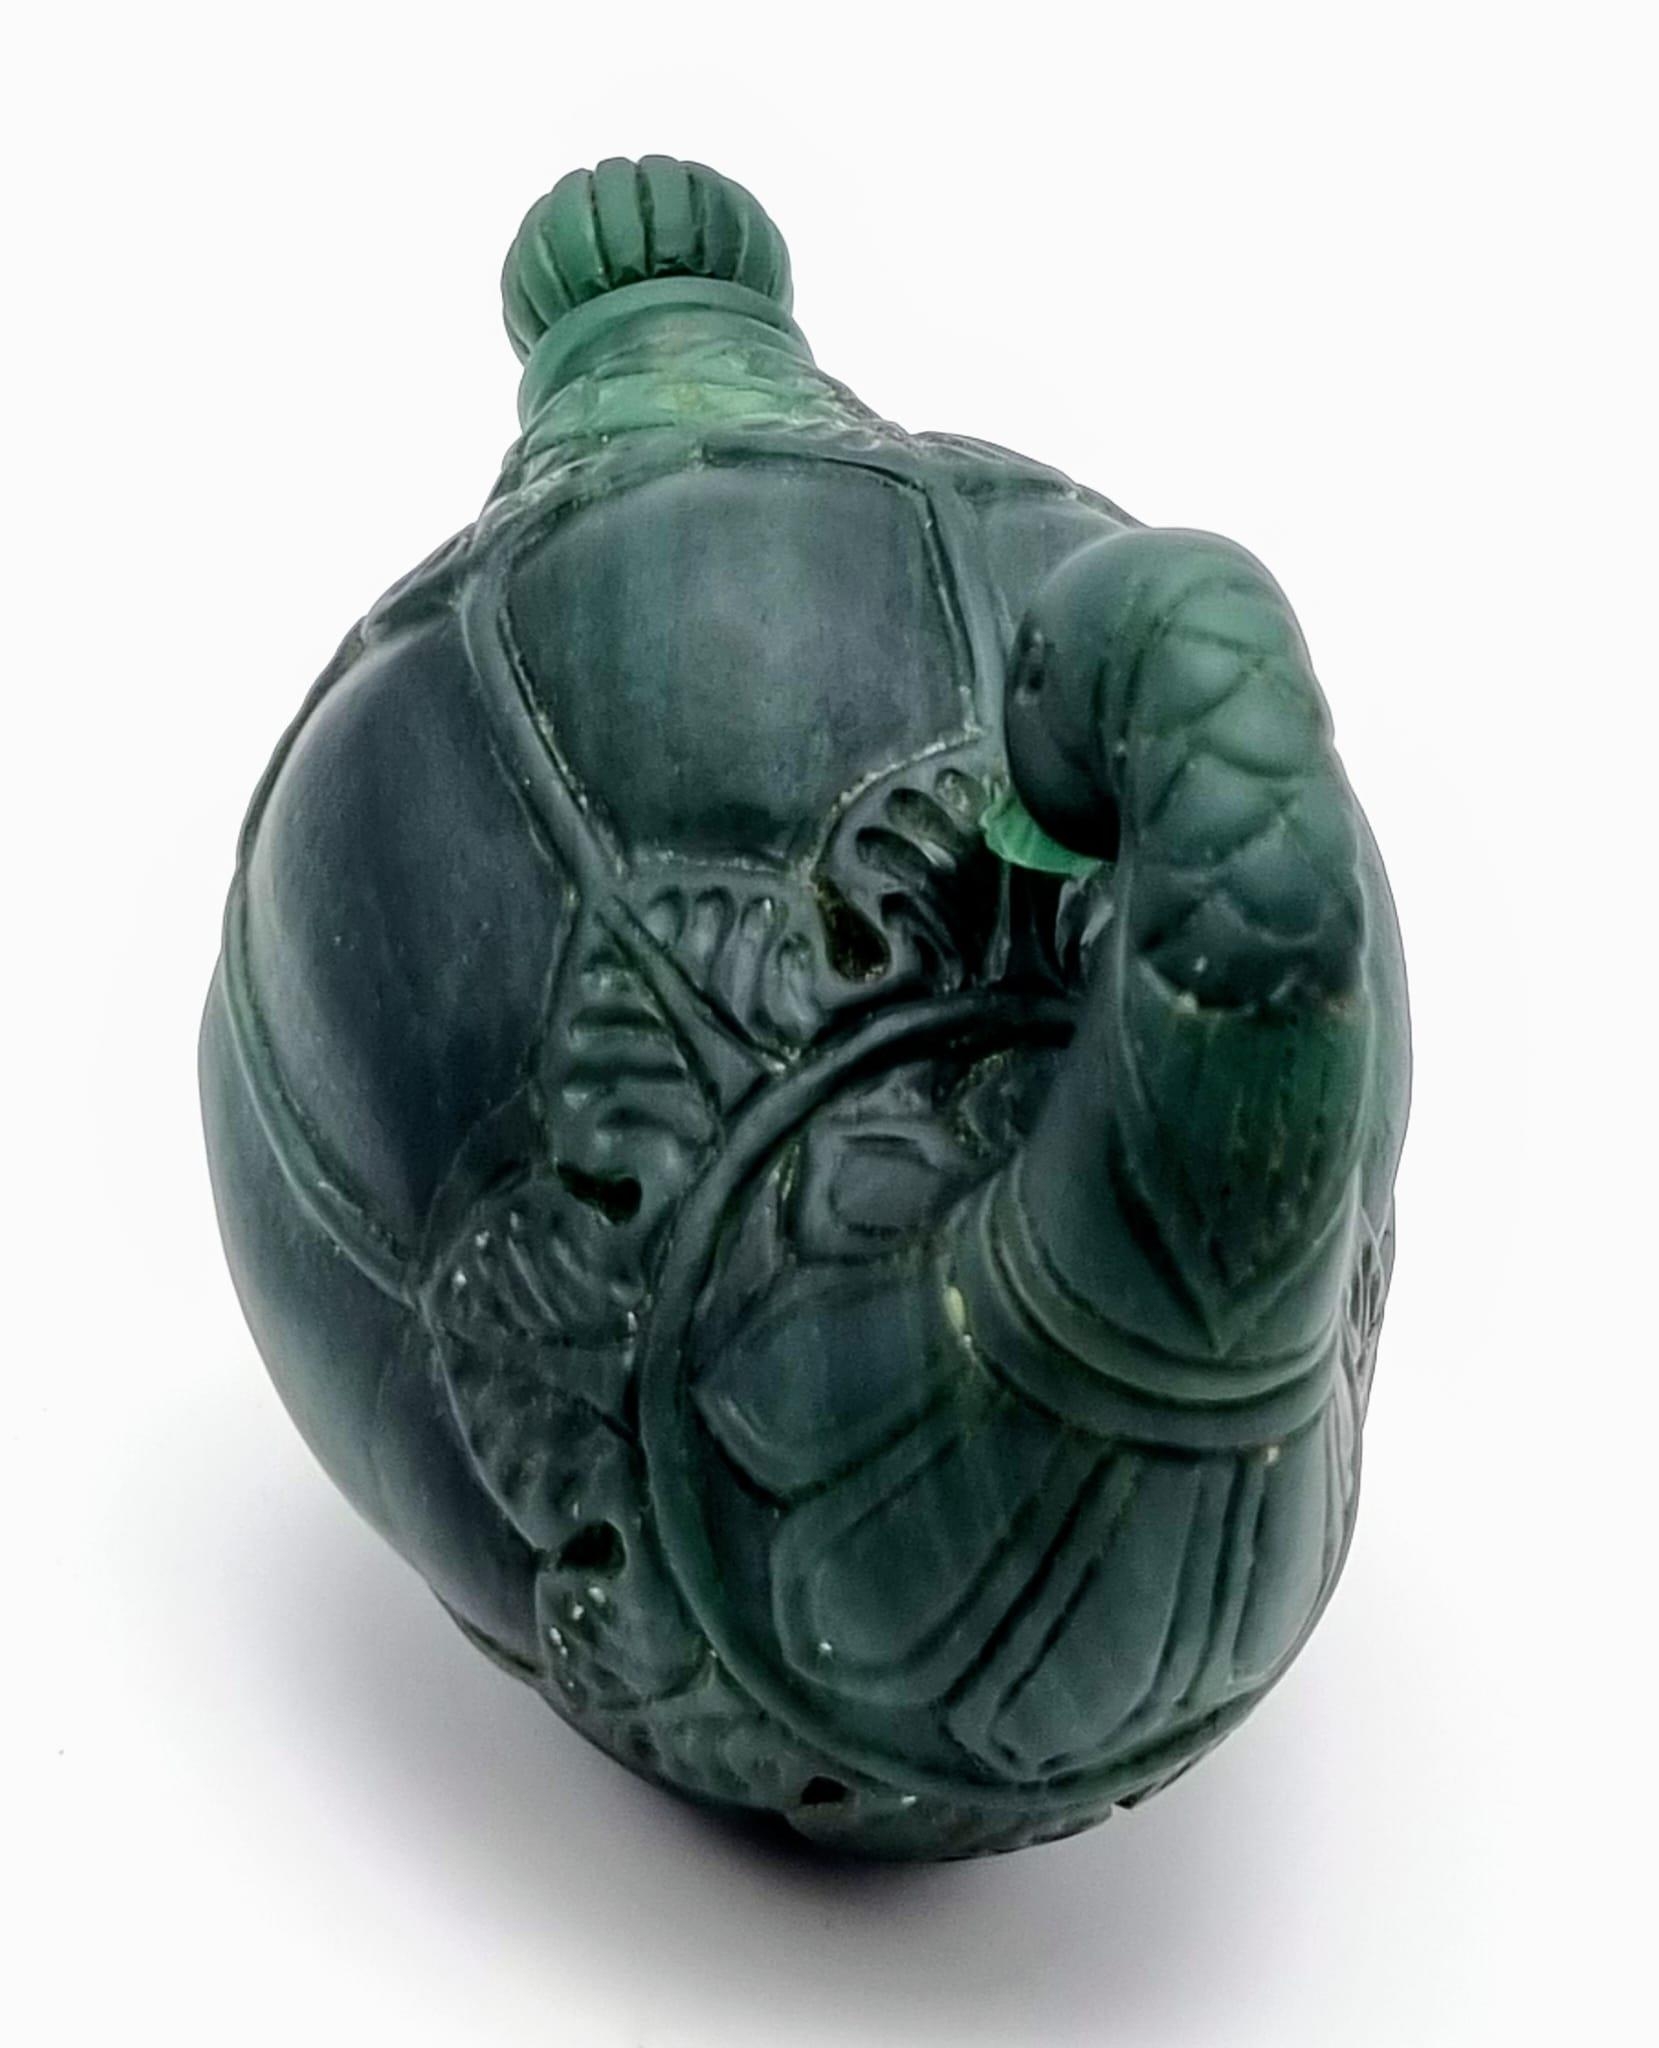 An Exquisite Antique Russian Green Jade Swan Perfume Bottle. 12 x 8cm. - Image 2 of 8